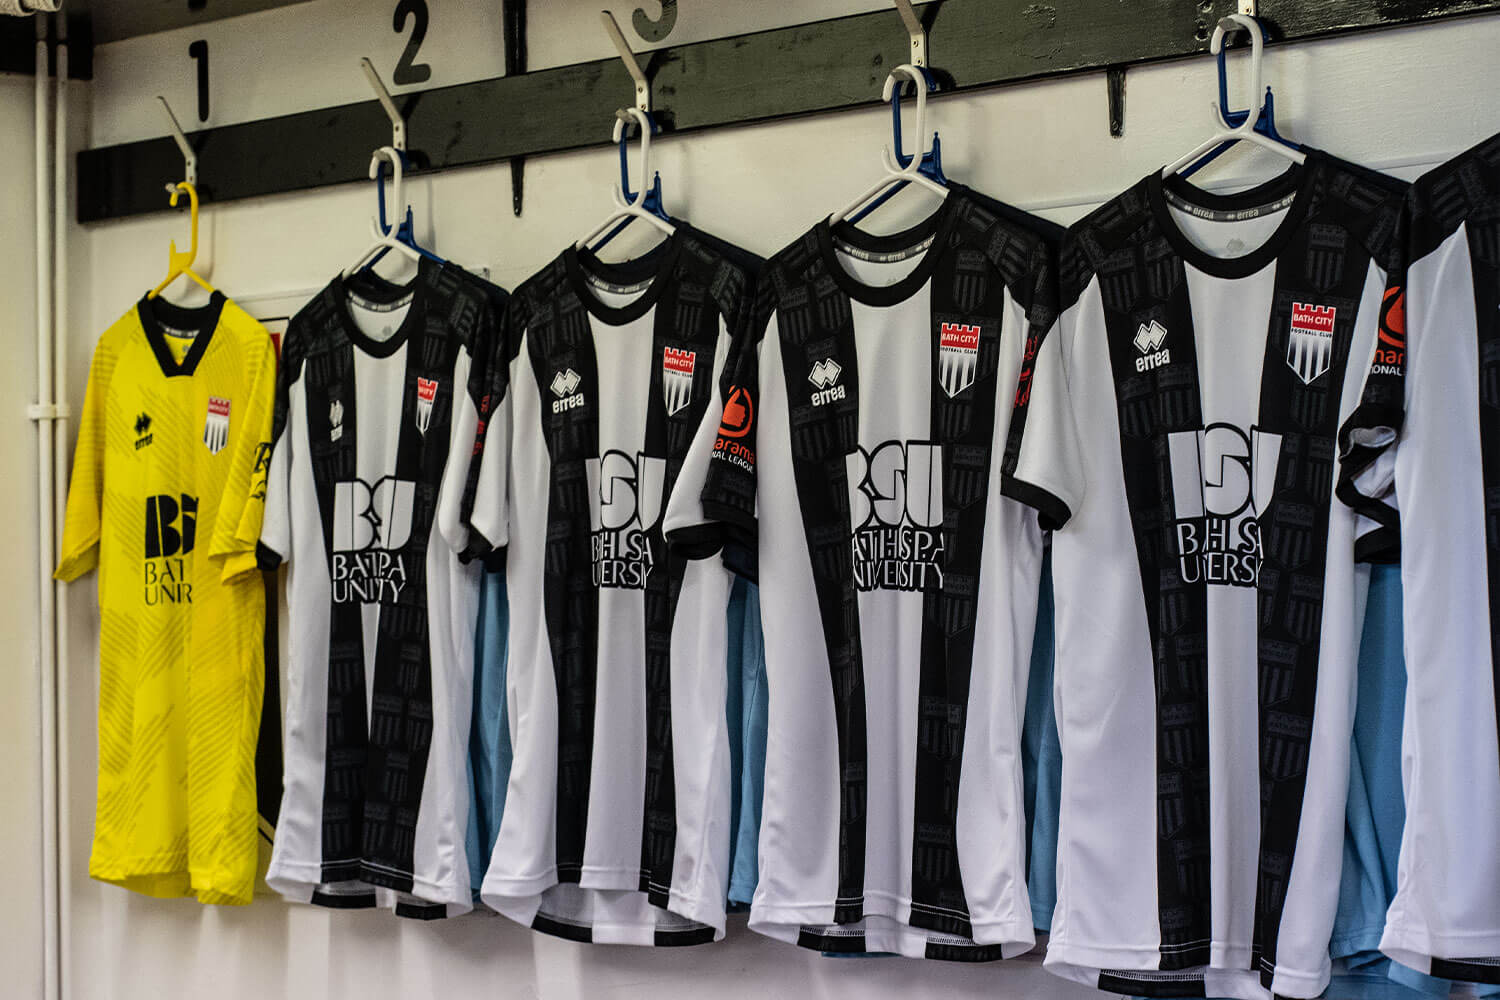 Bath City FC black and white shirts, showcasing the new BSU logo, hanging on clothing hangers in the home team dressing room